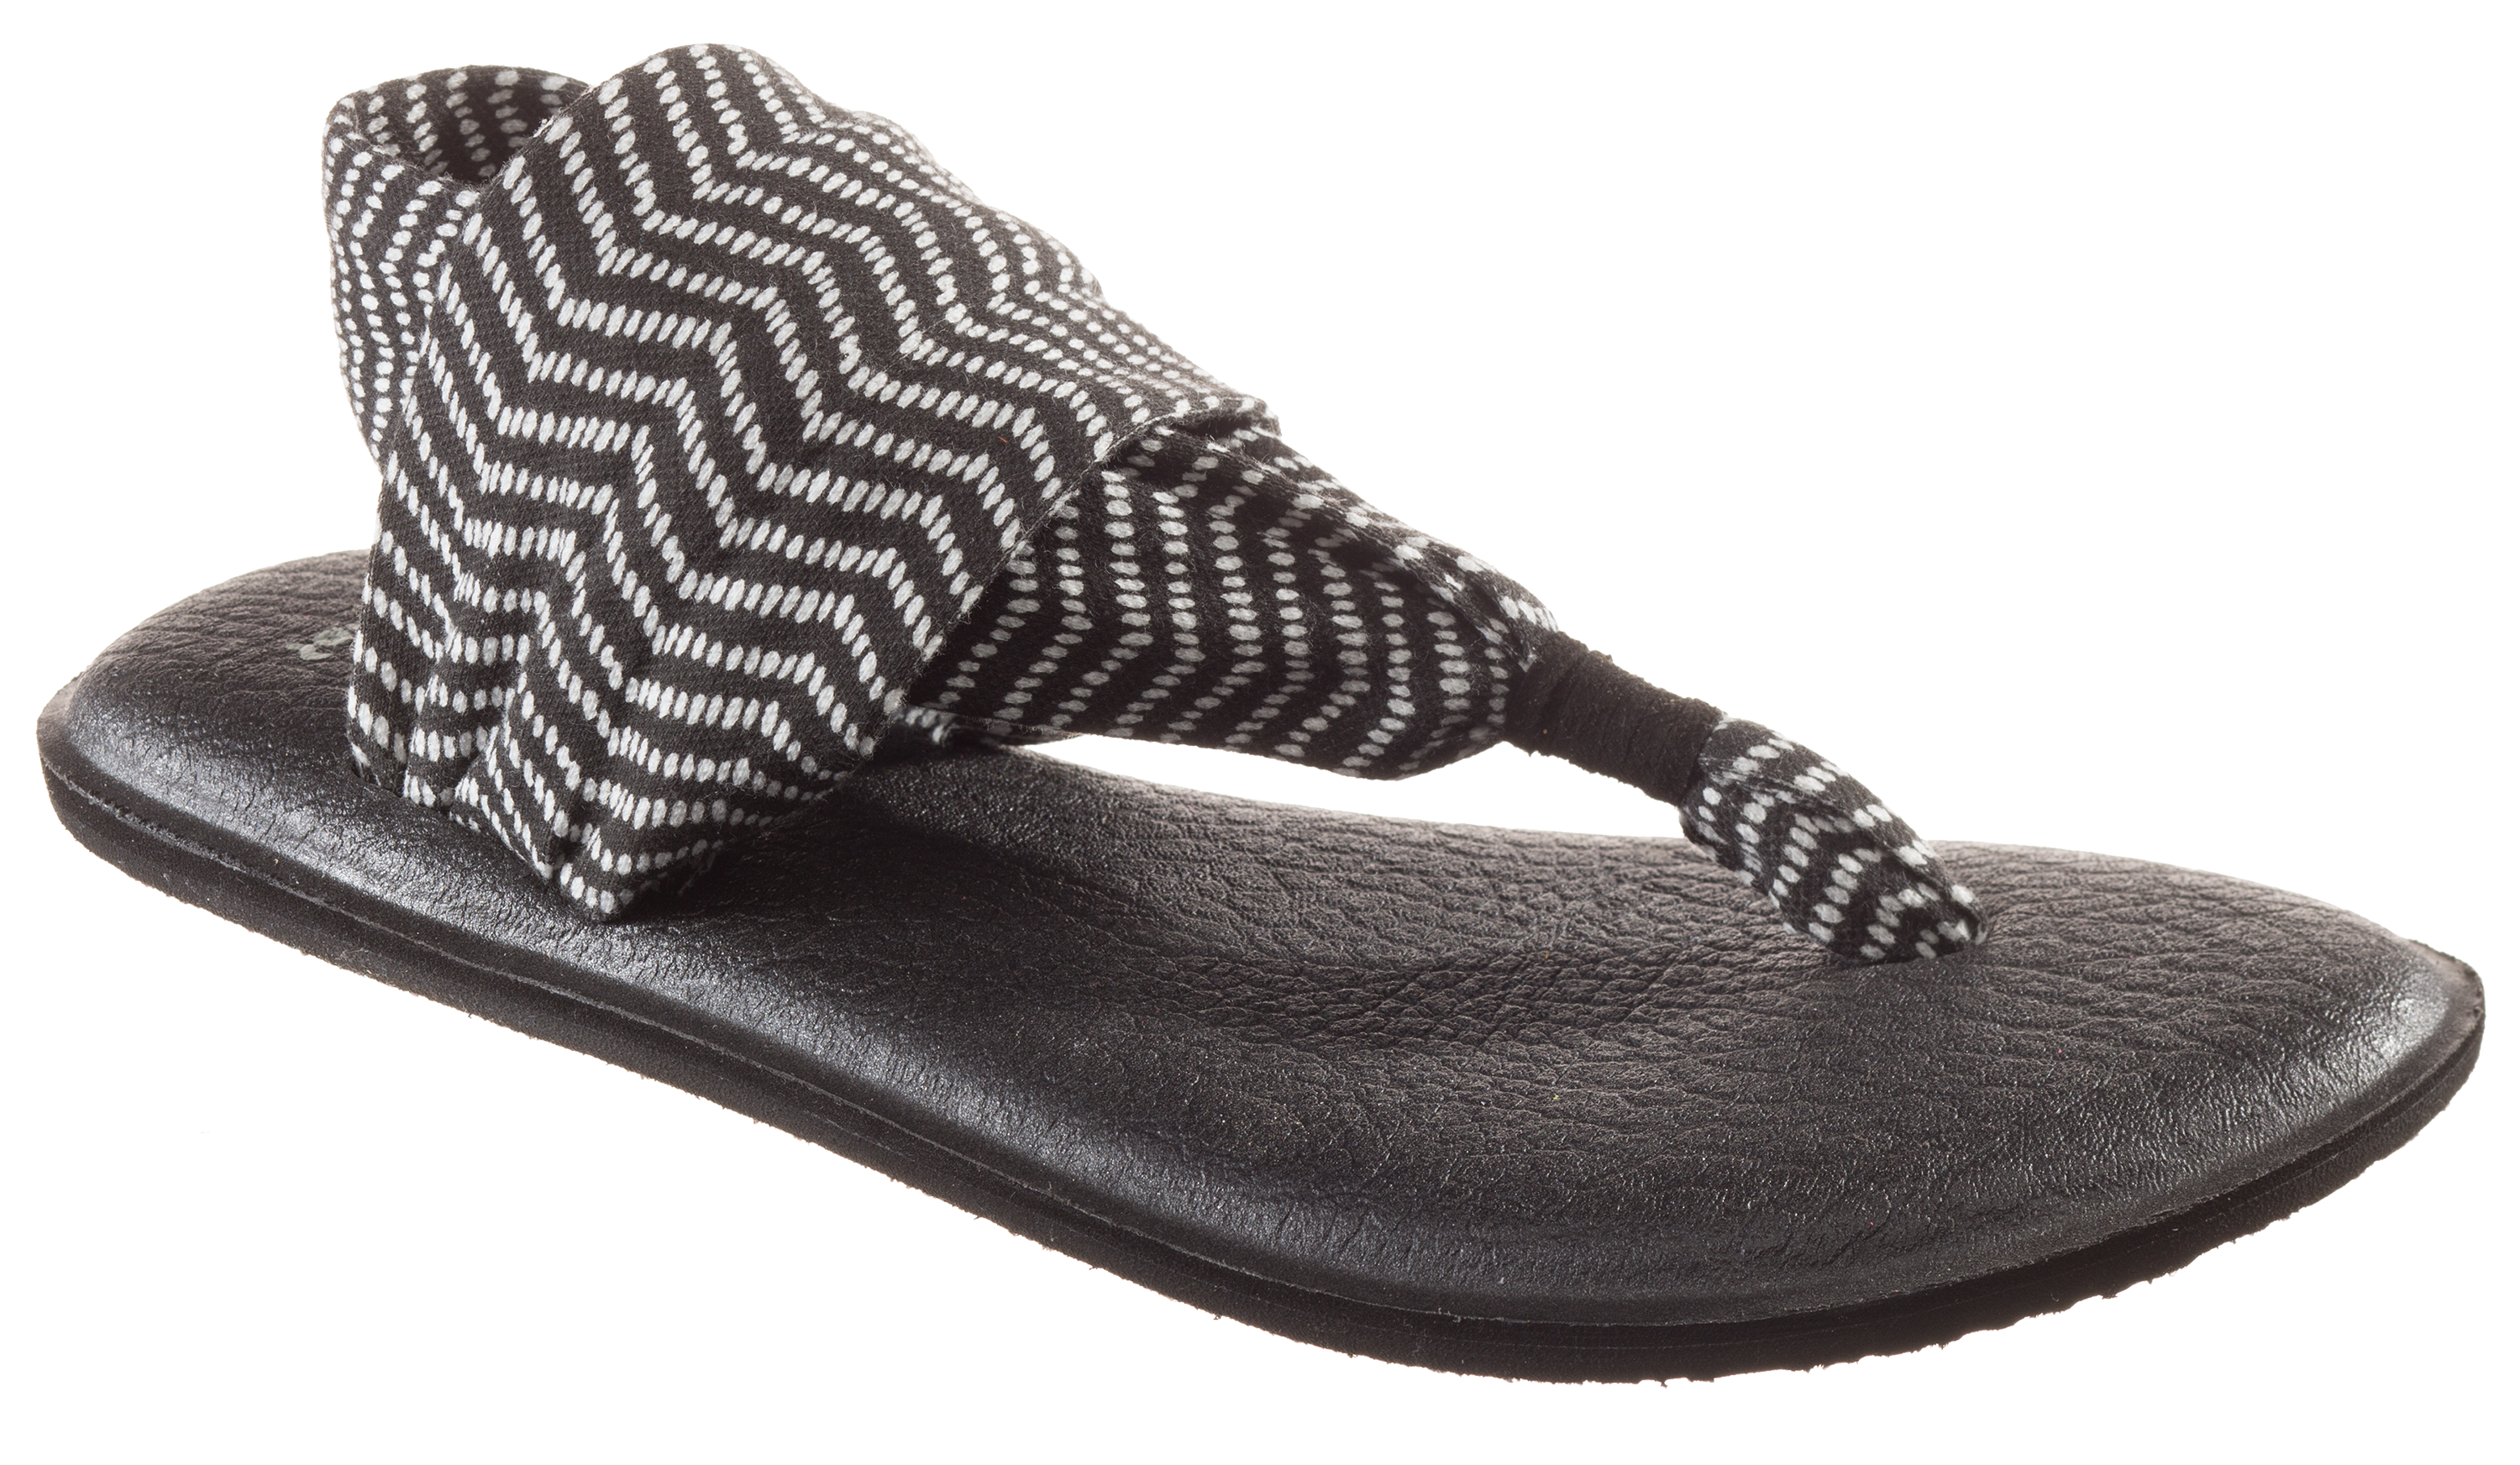 Sanuk - “These are the best flip-flops they've come out with in years they  are squishy and comfy and I absolutely love them you will be so happy if  you purchase these